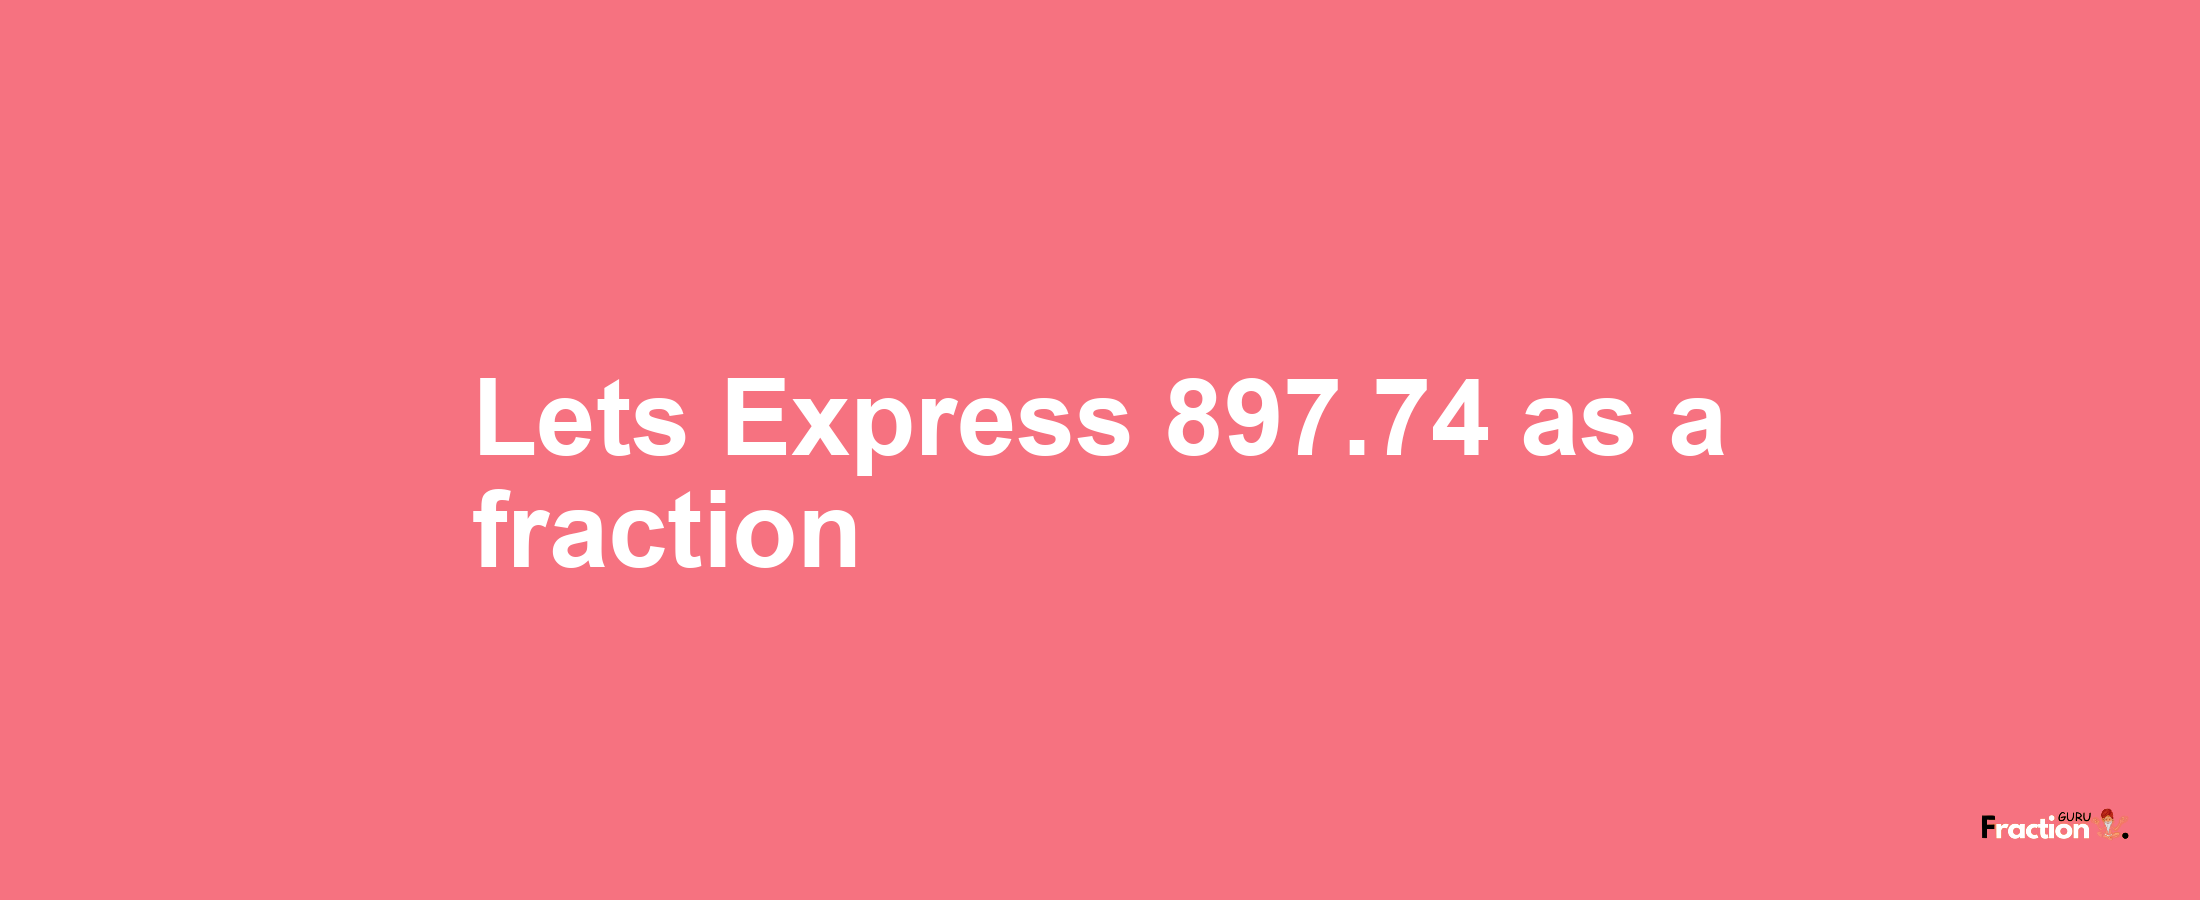 Lets Express 897.74 as afraction